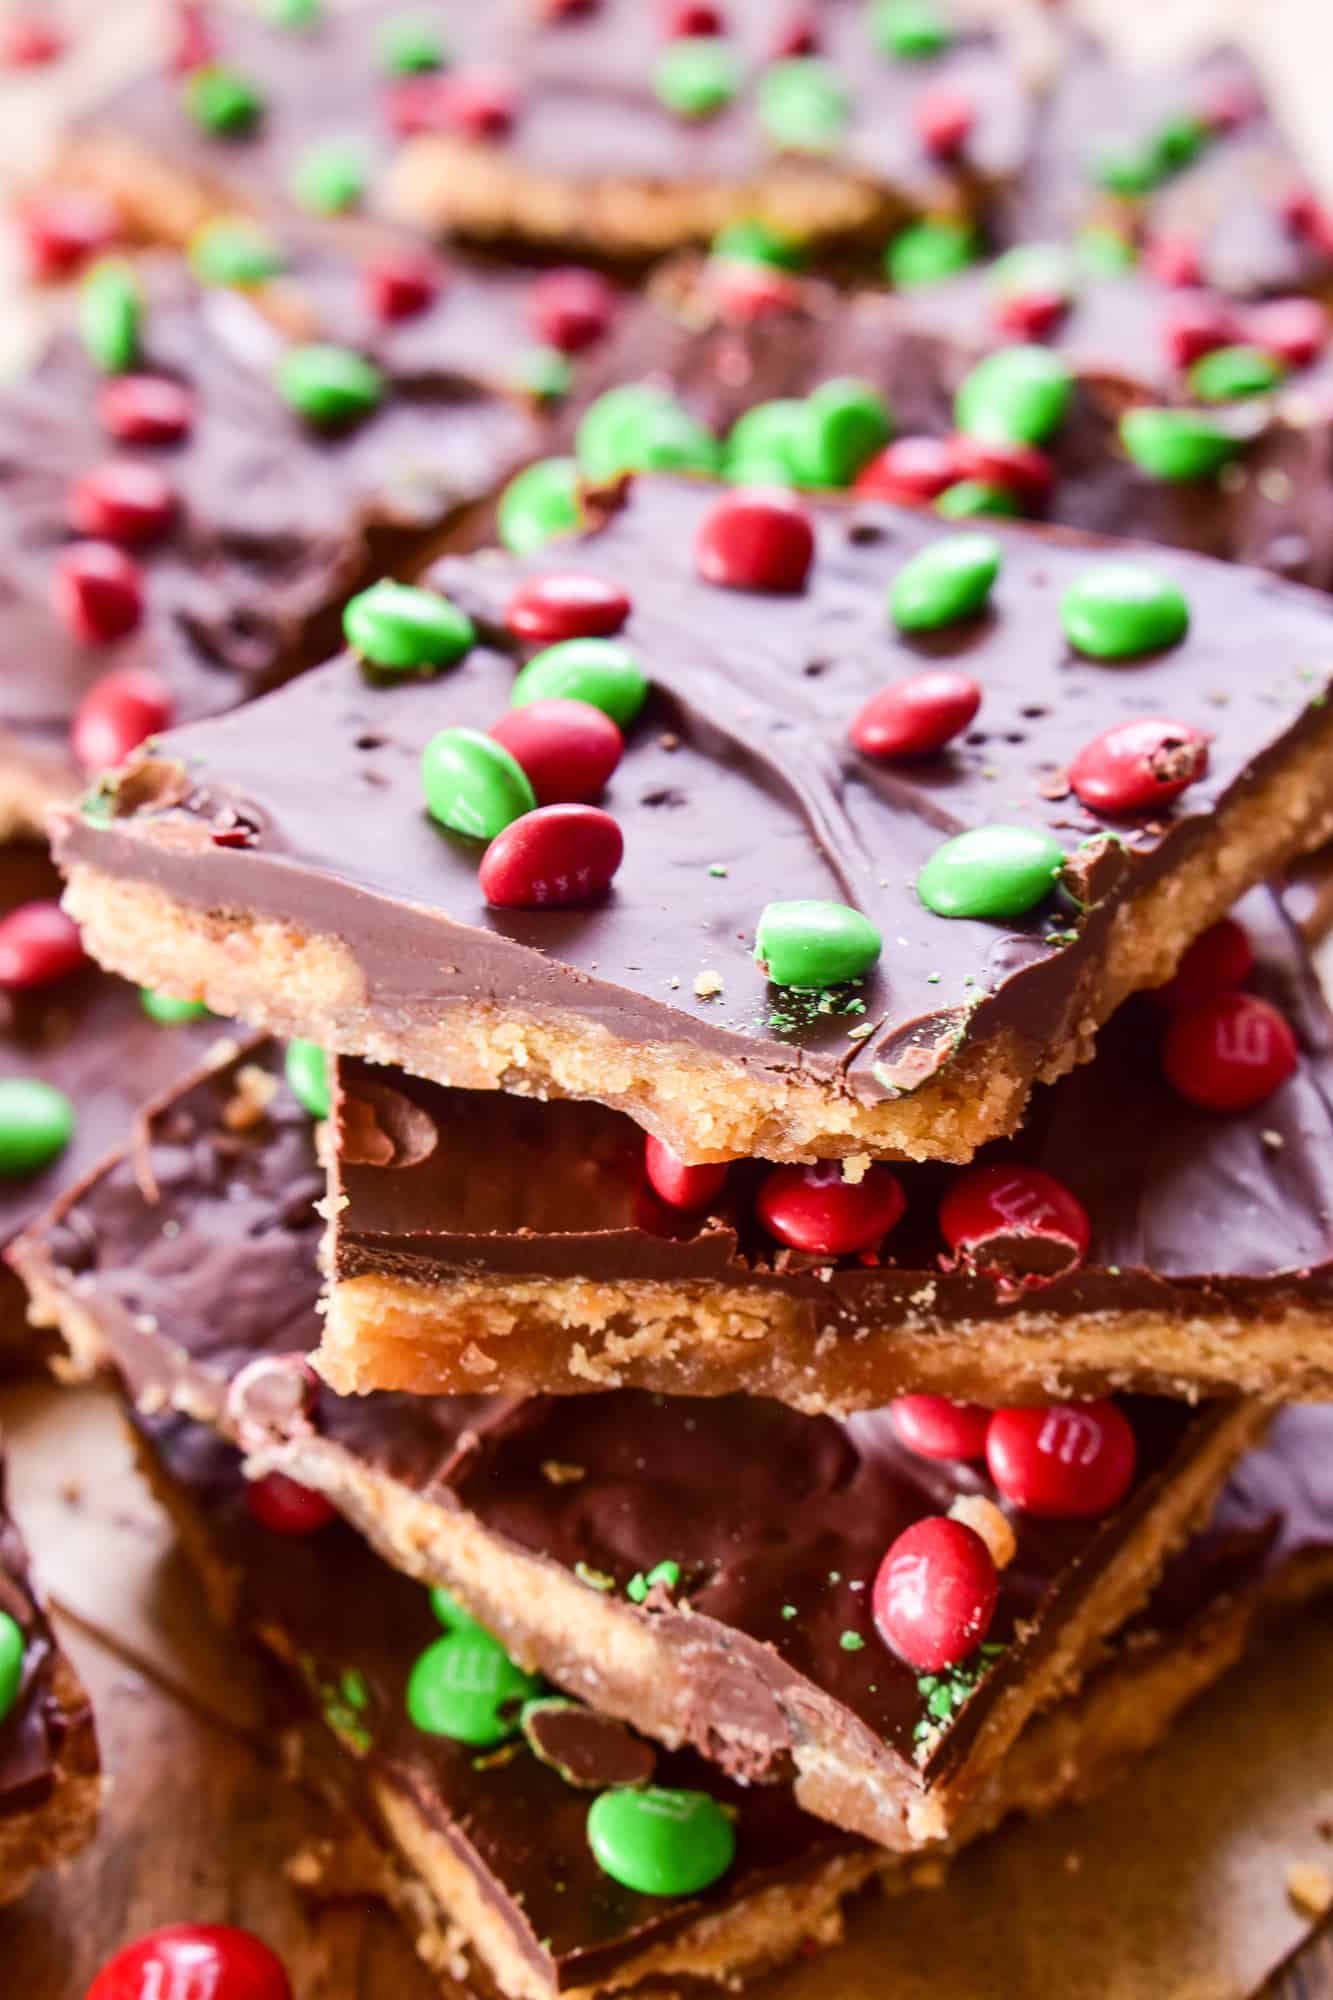 Pile of Christmas Crack with m&m's